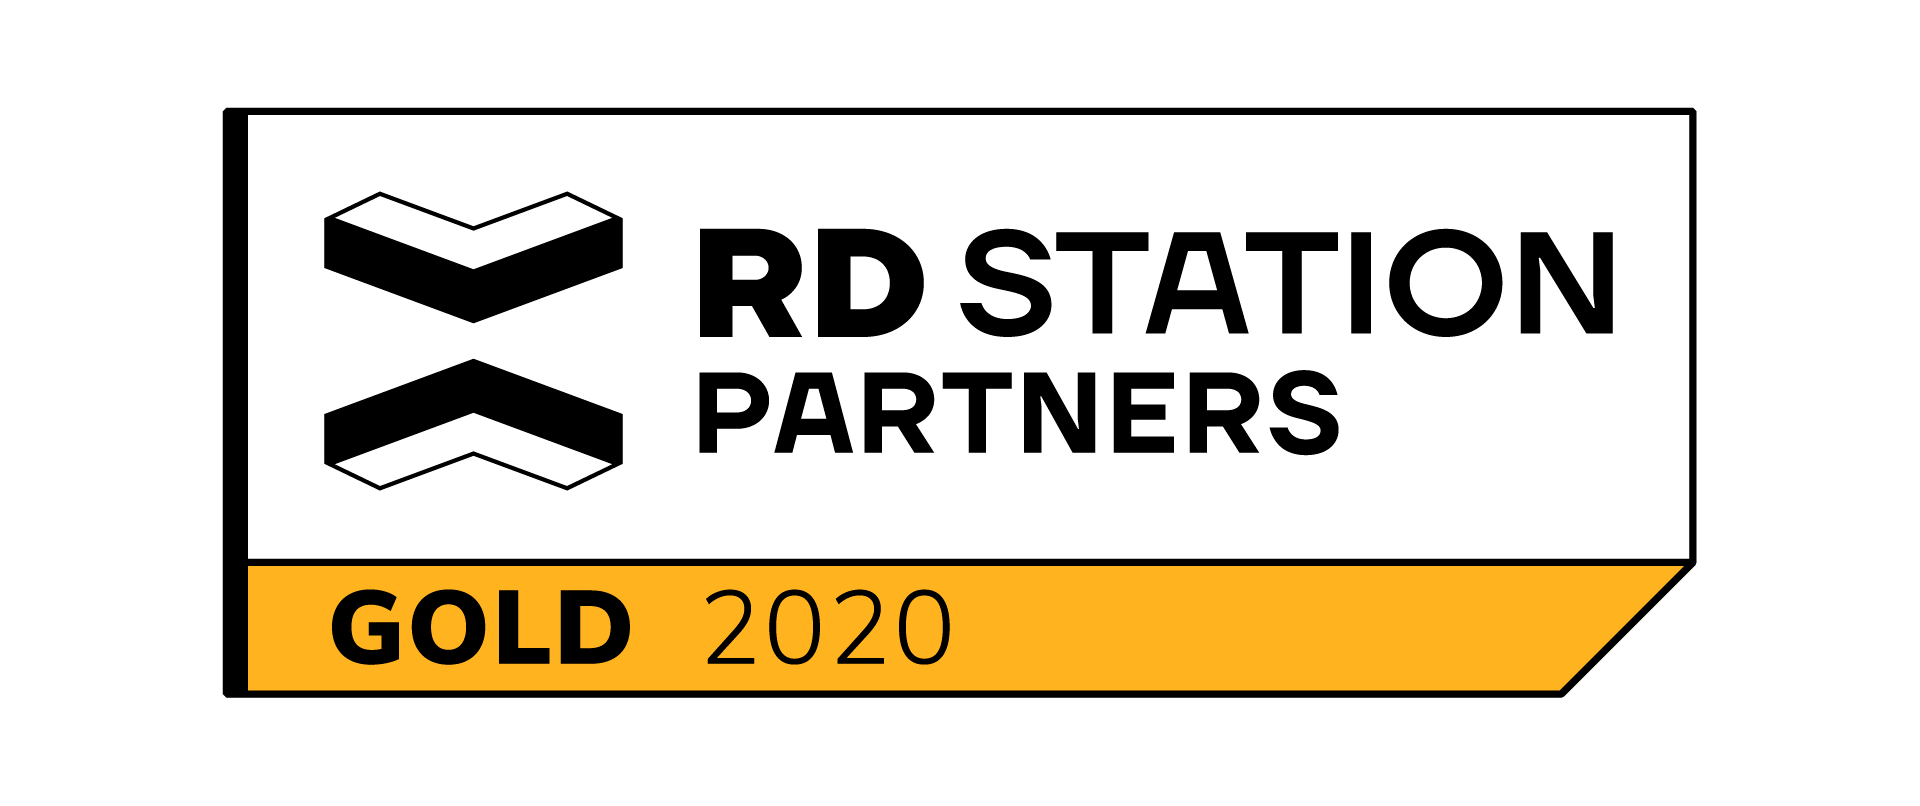 RD Station partners